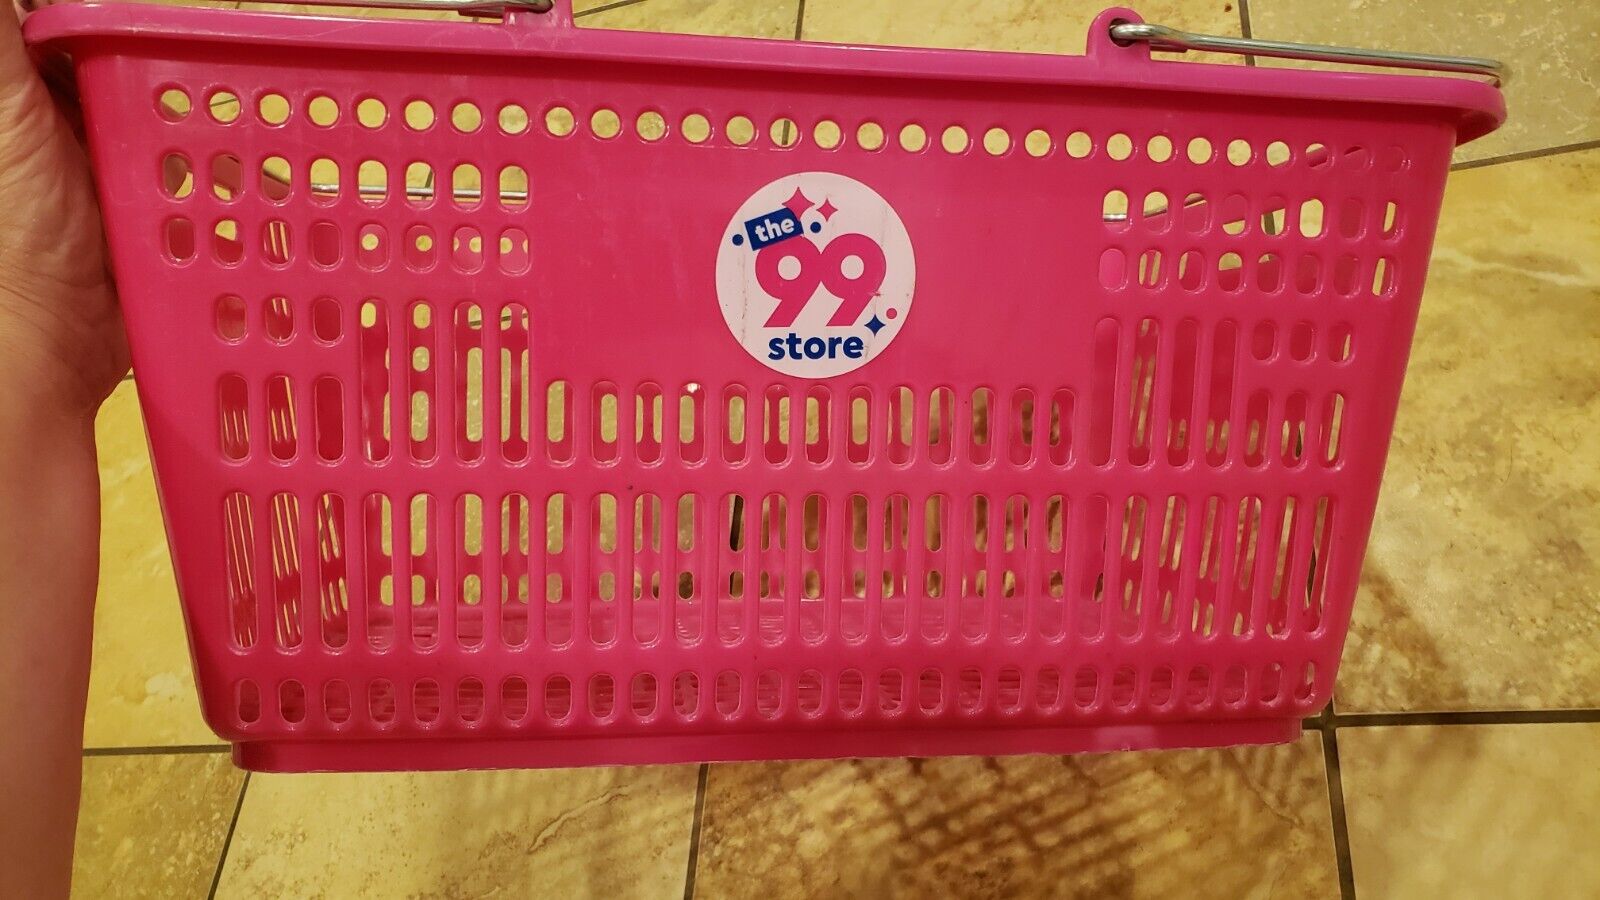 Deep Pink Color, 99 Cents Only Store Hand Basket, Used, Going Out Of Business